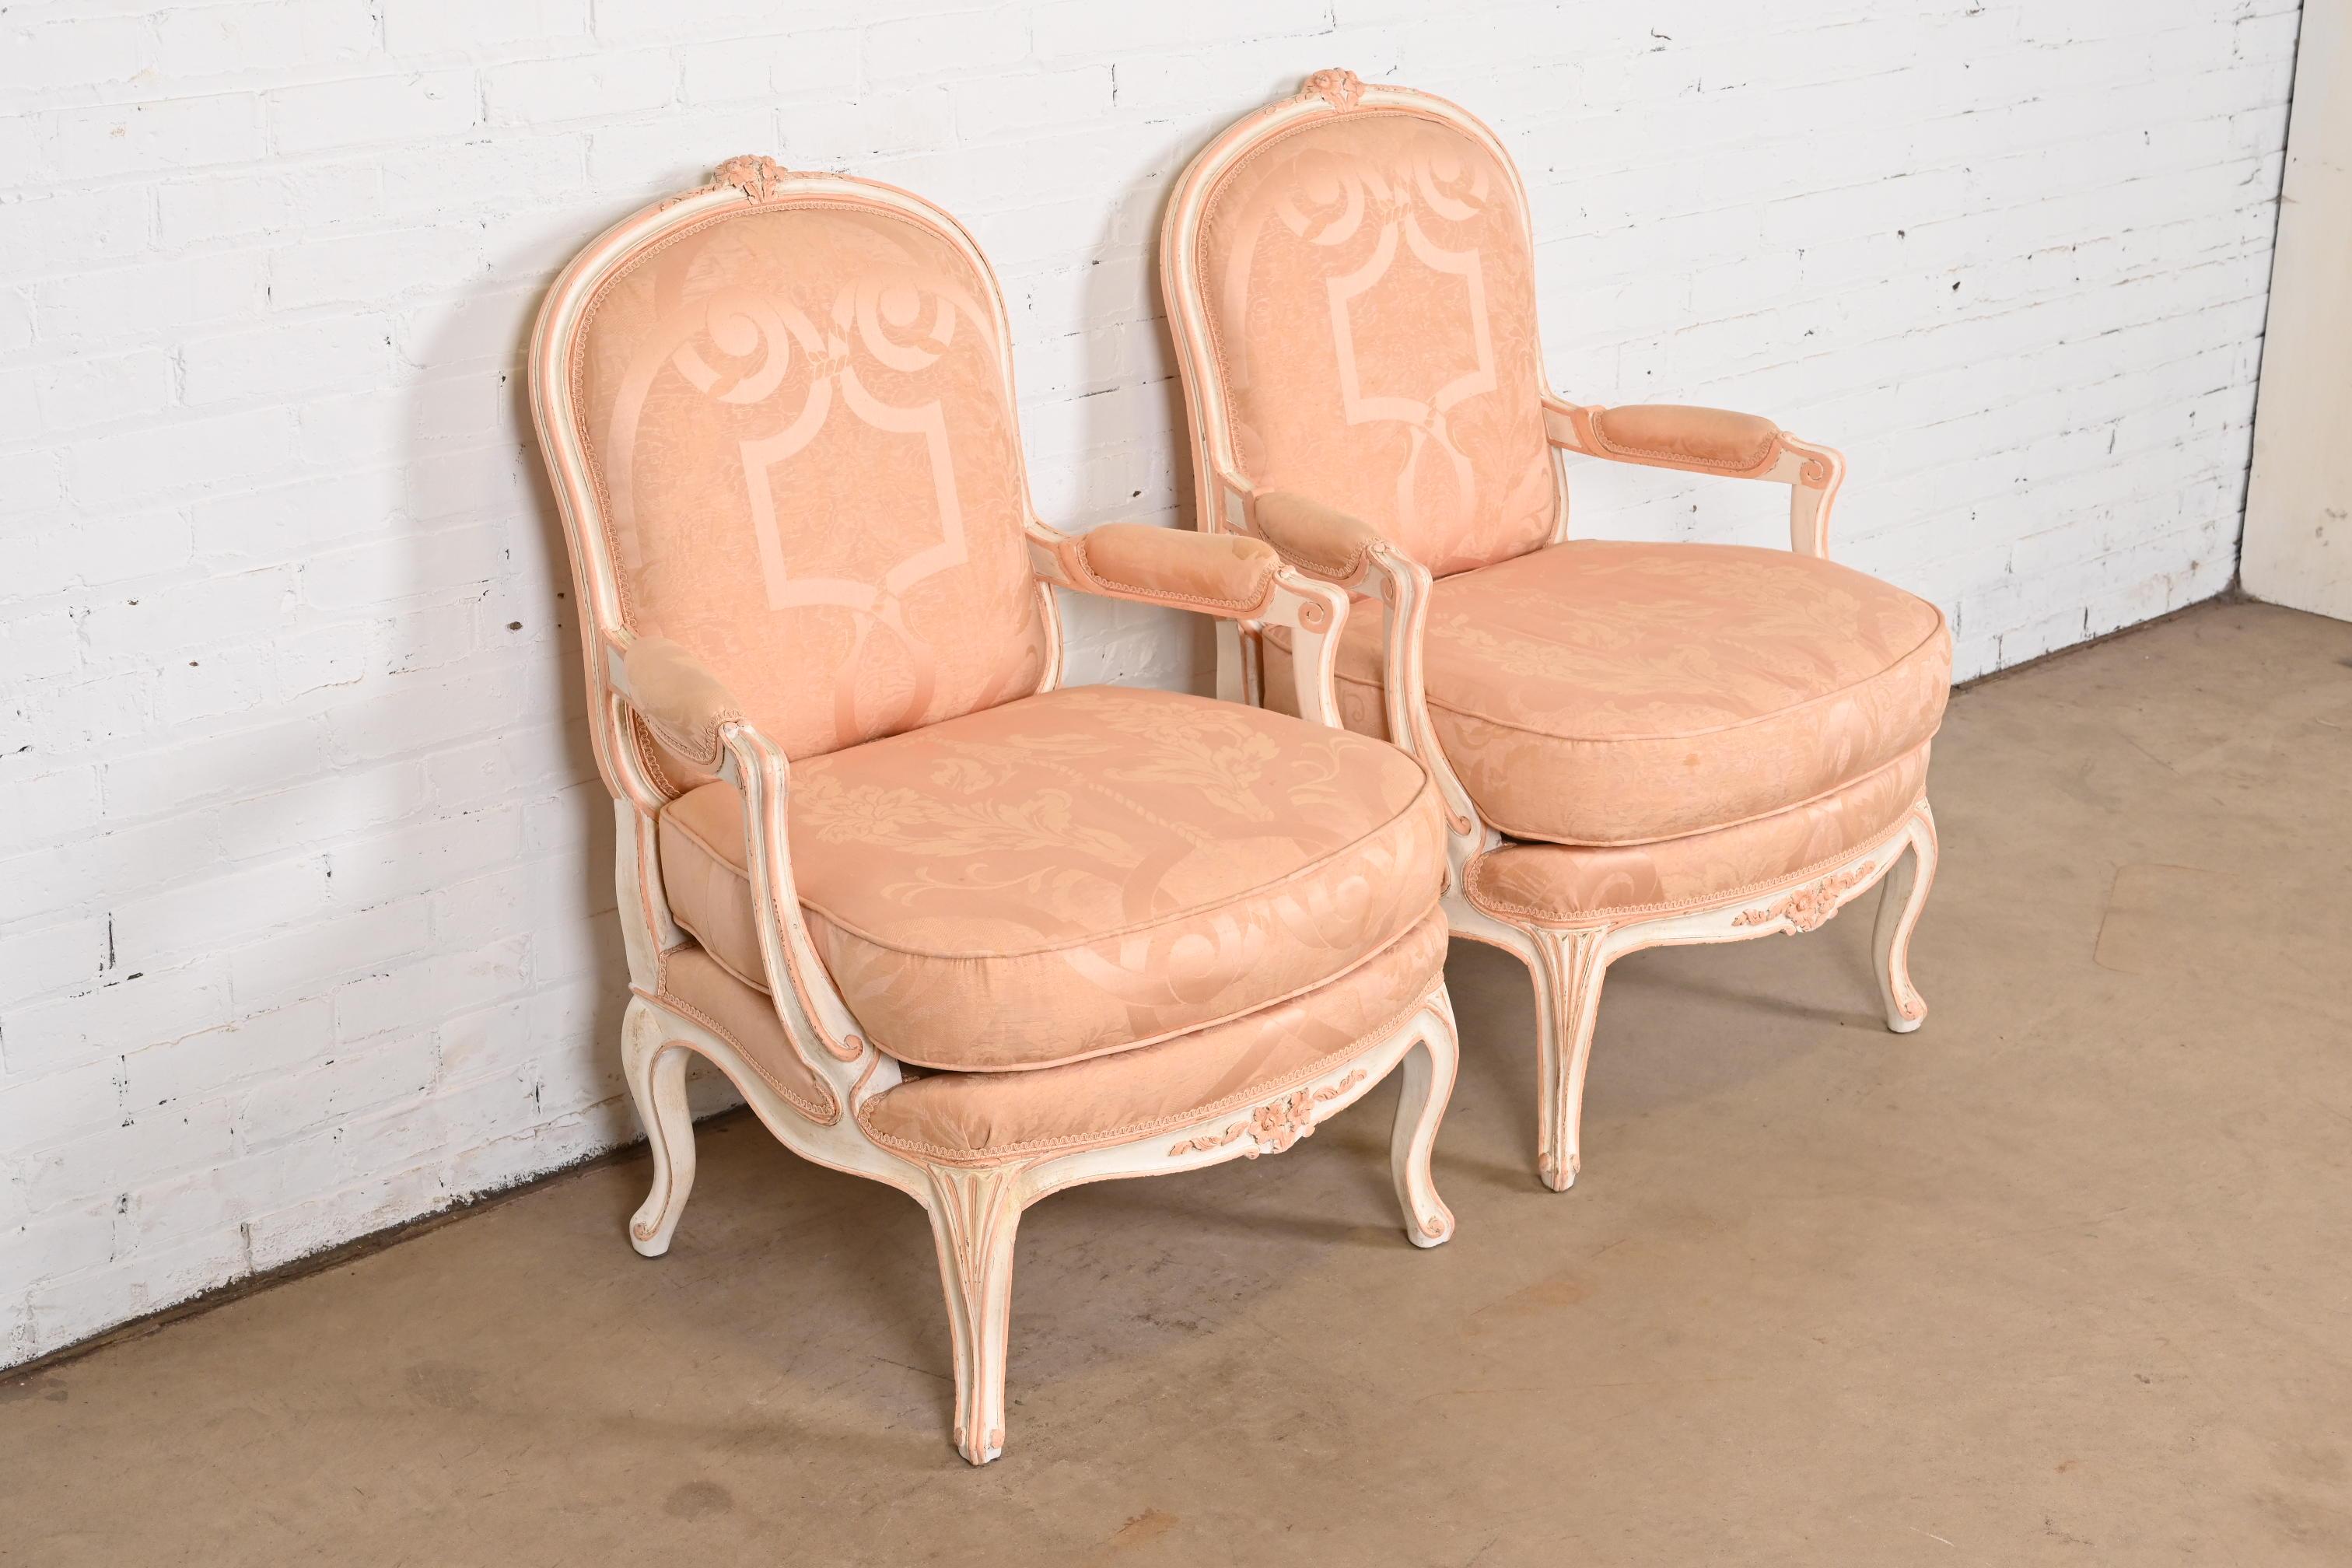 French Provincial Louis XV Carved Painted Walnut Fauteuils, Pair For Sale 2